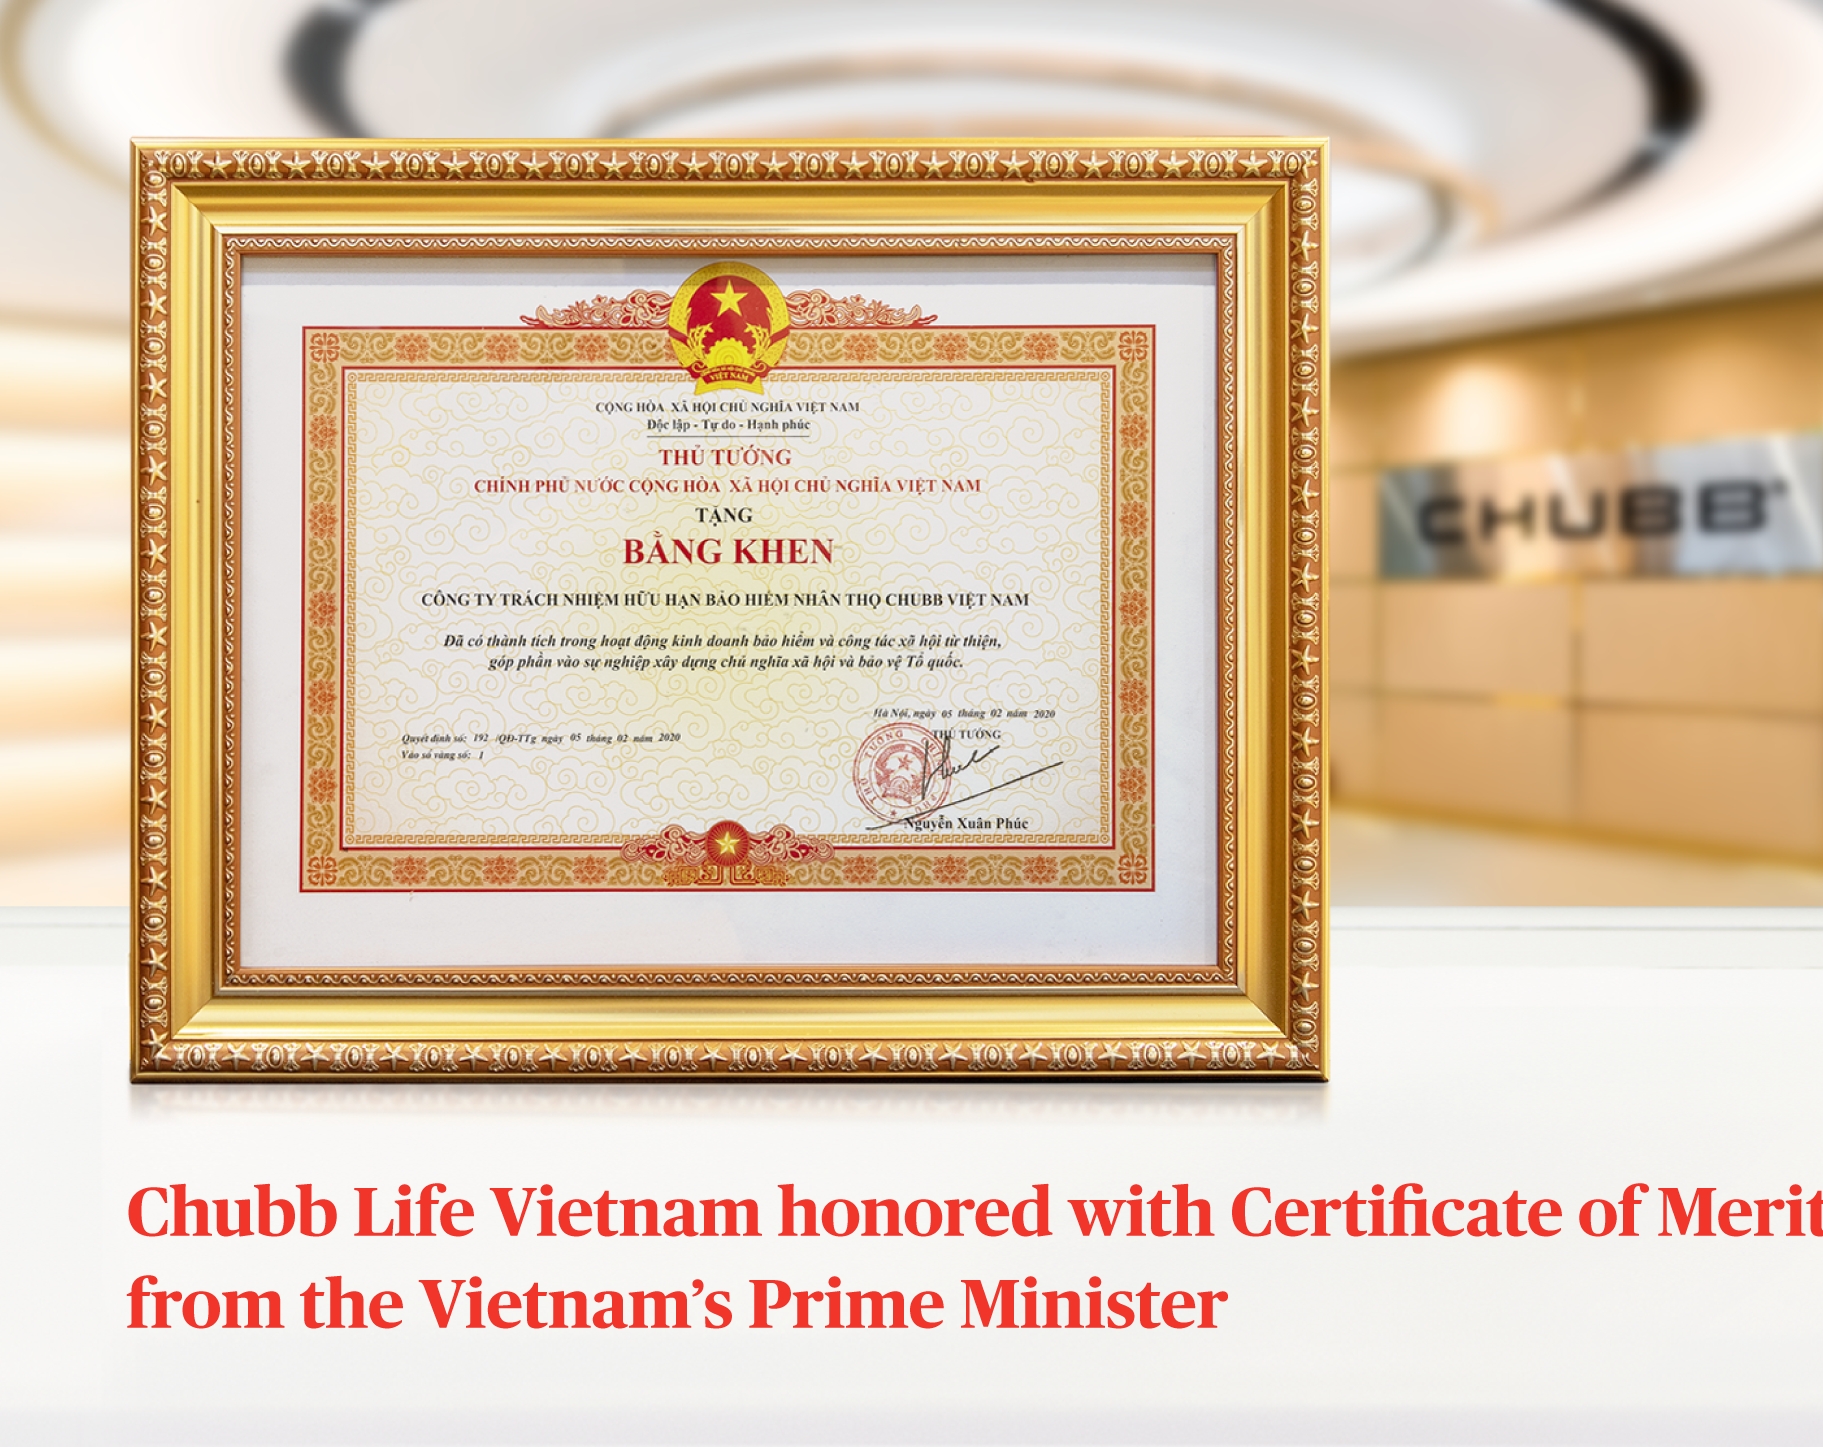 Chubb Life Vietnam honoured with Certificate of Merit from Vietnamese prime minister